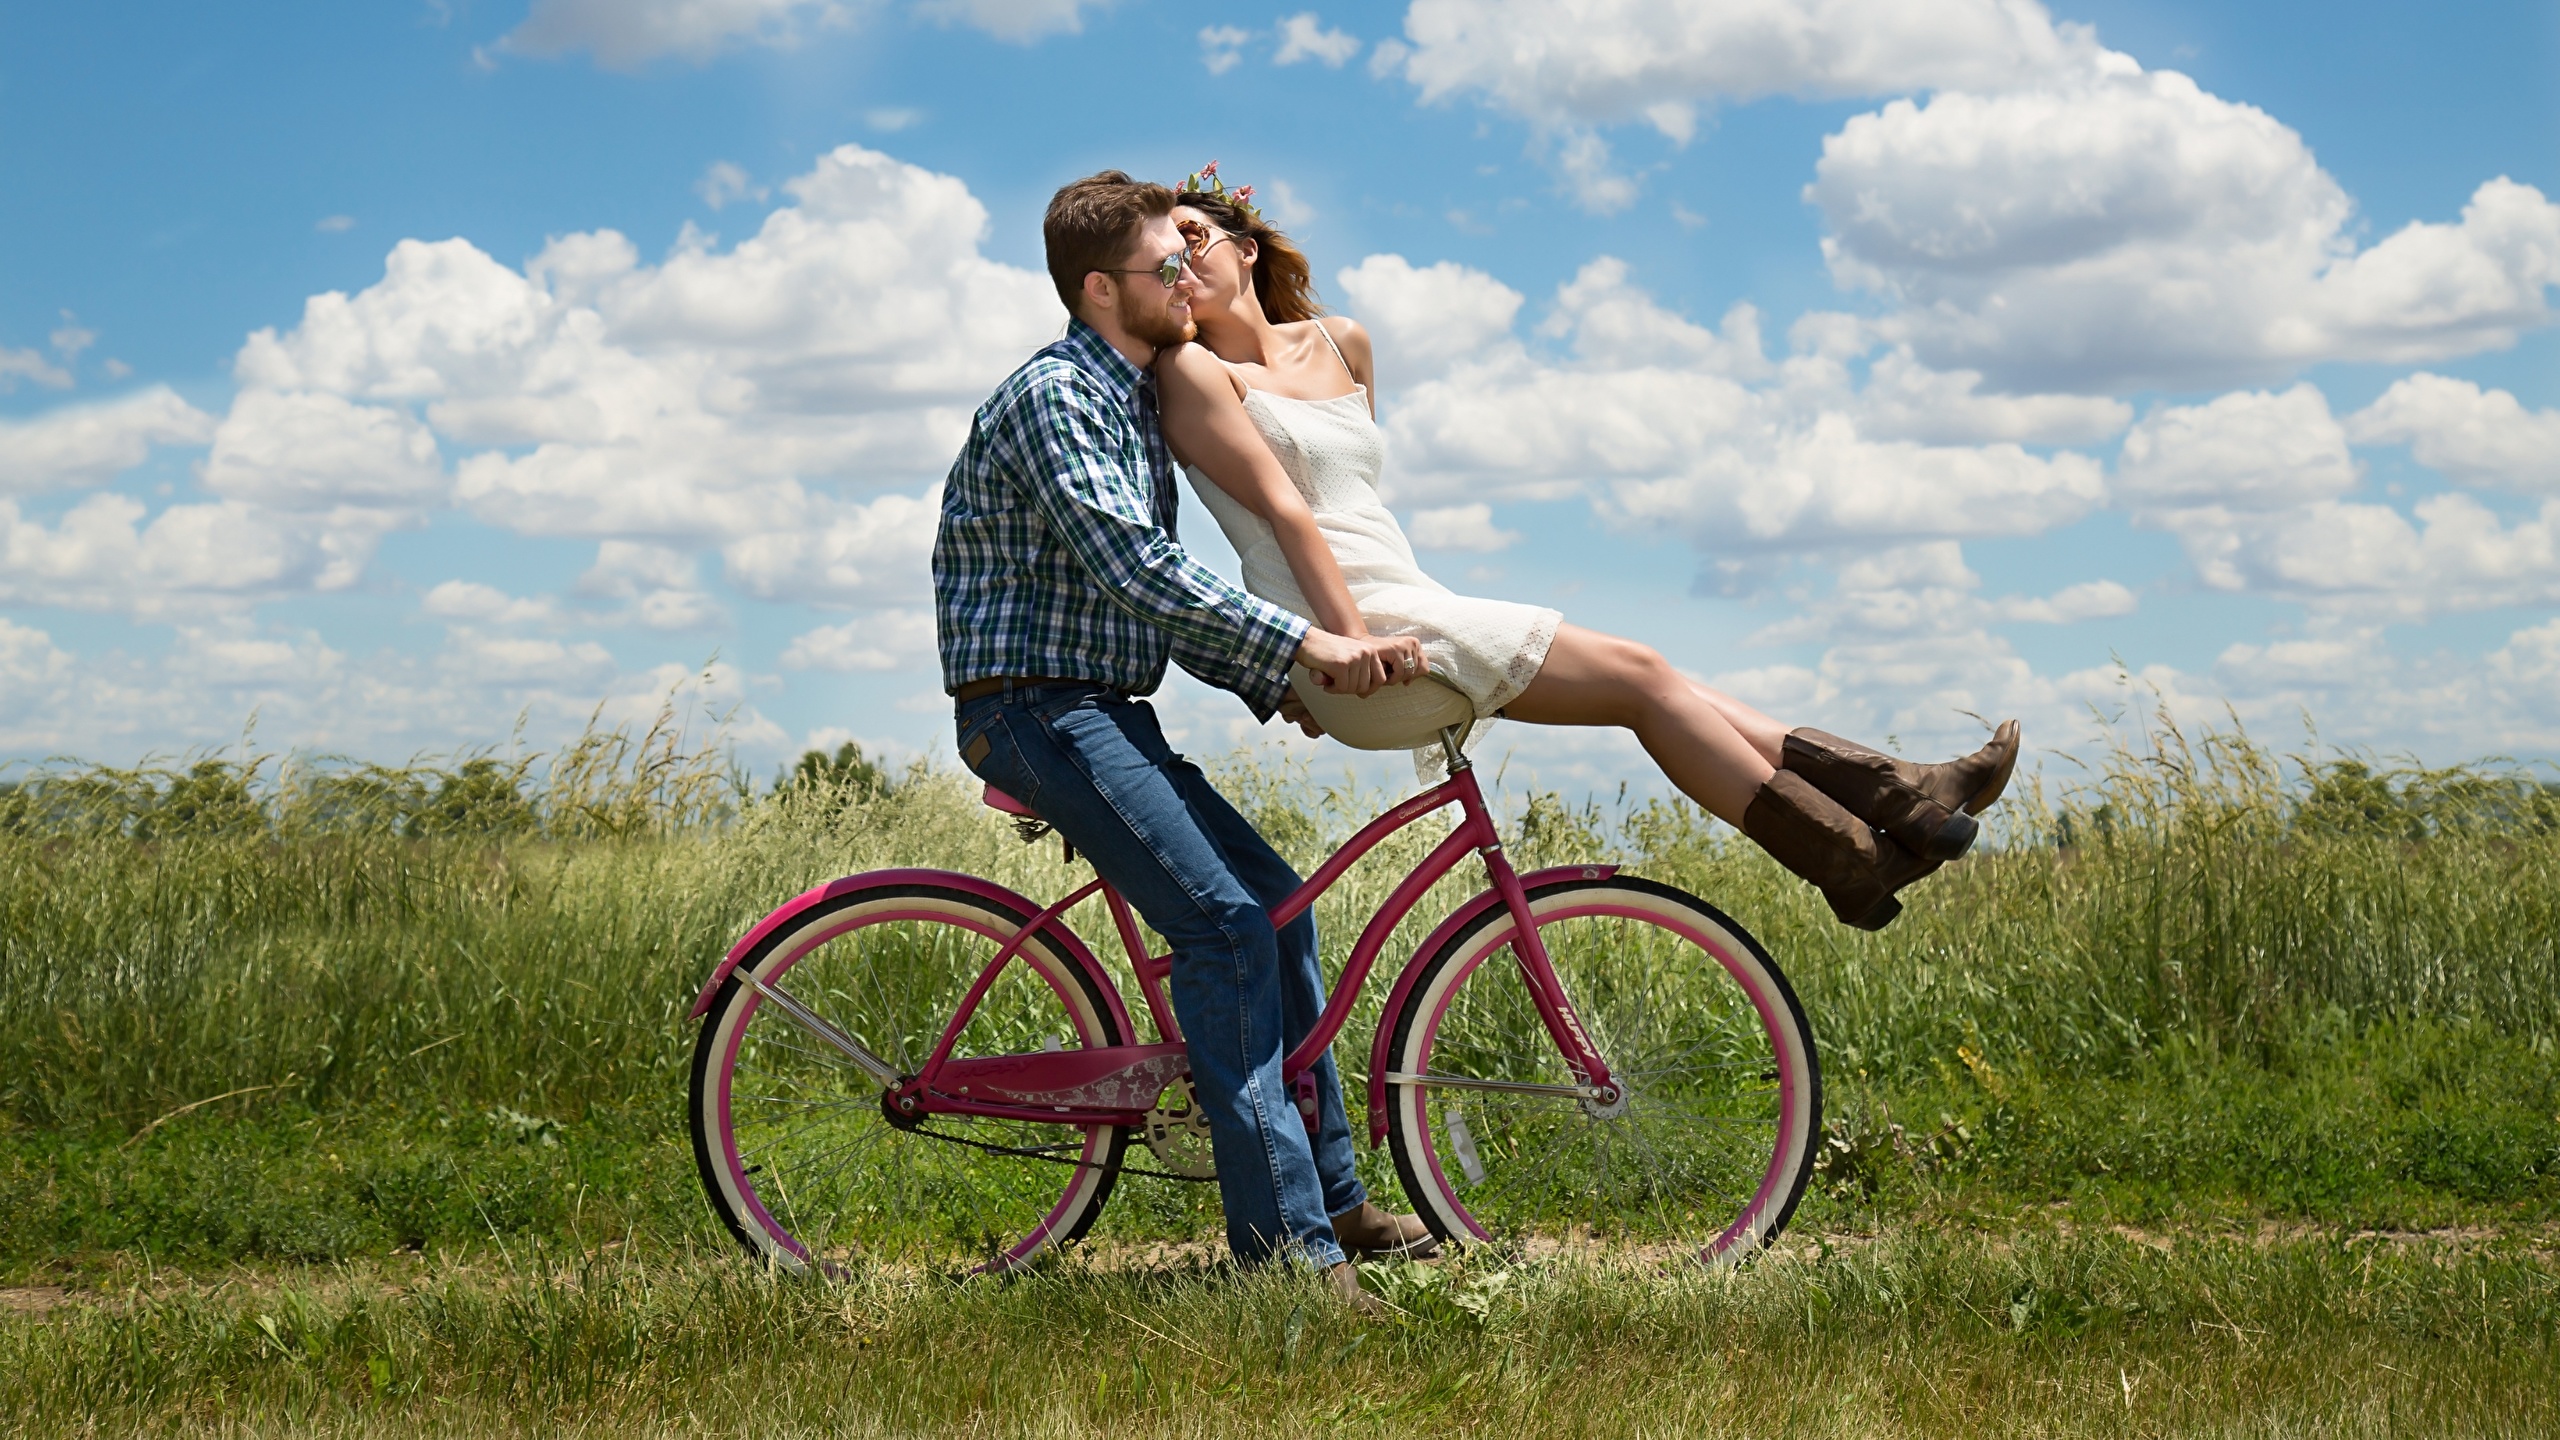 Wallpaper Men Couples in love kisses Bicycle 2 young 2560x1440